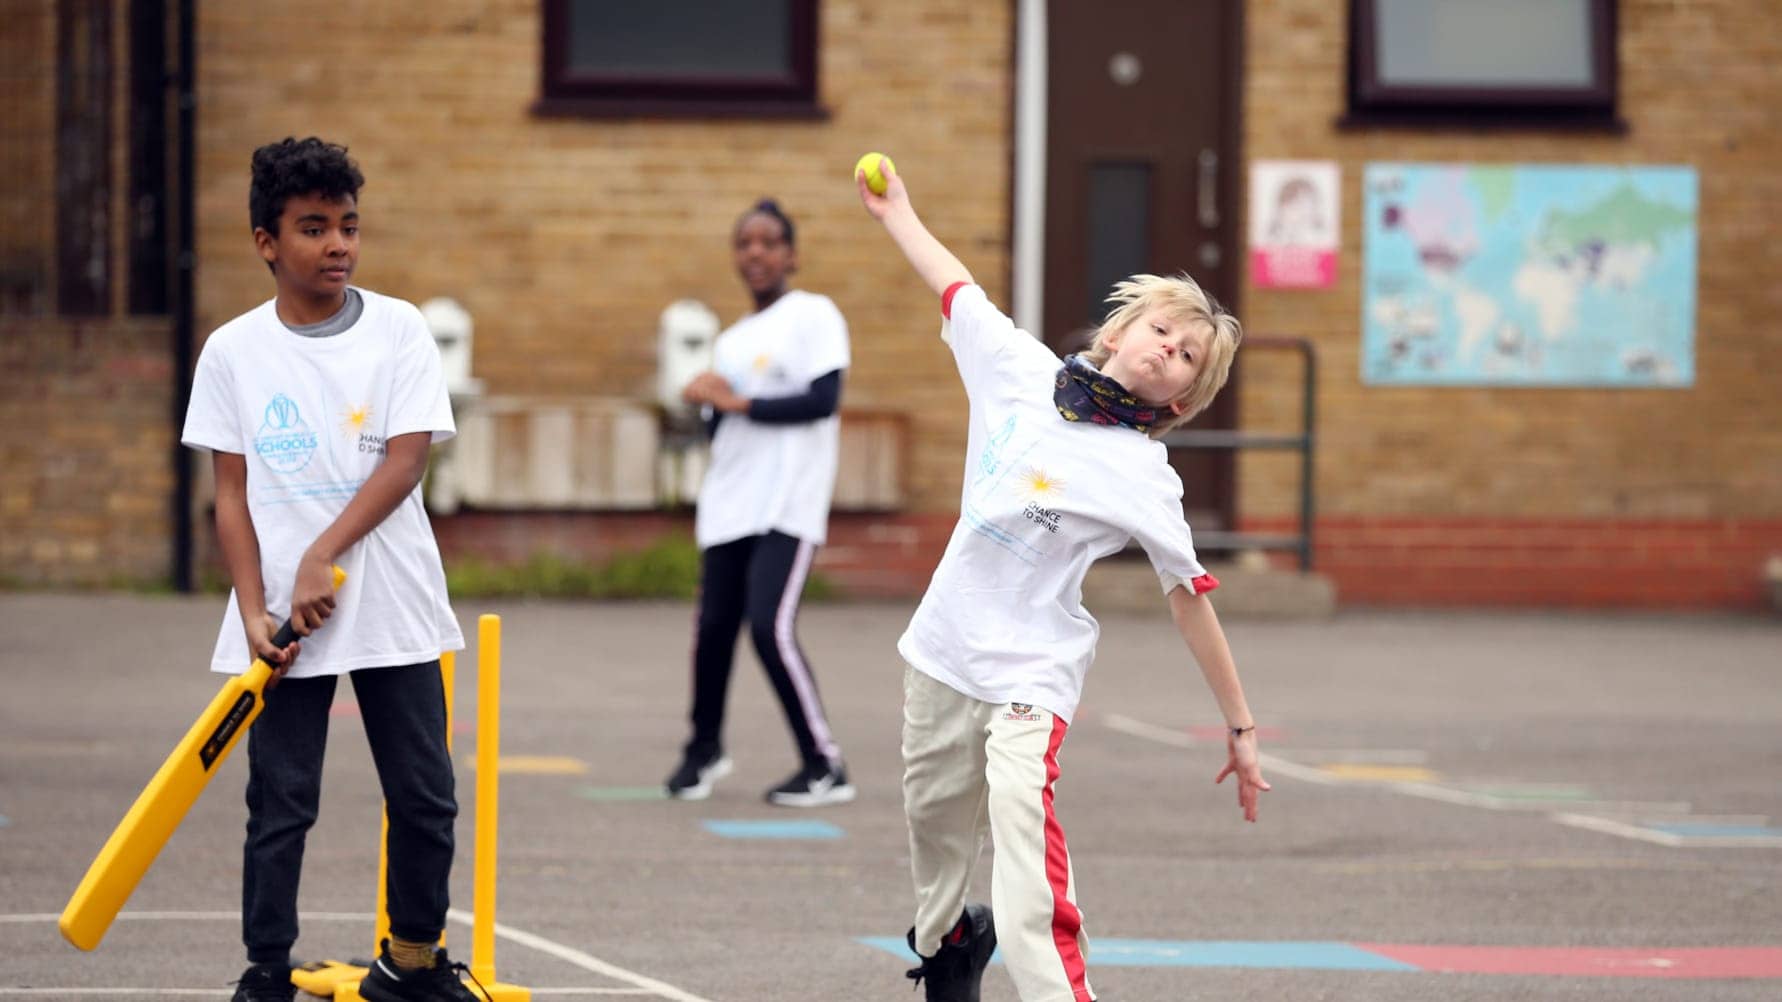 Youngsters play cricket in school playground